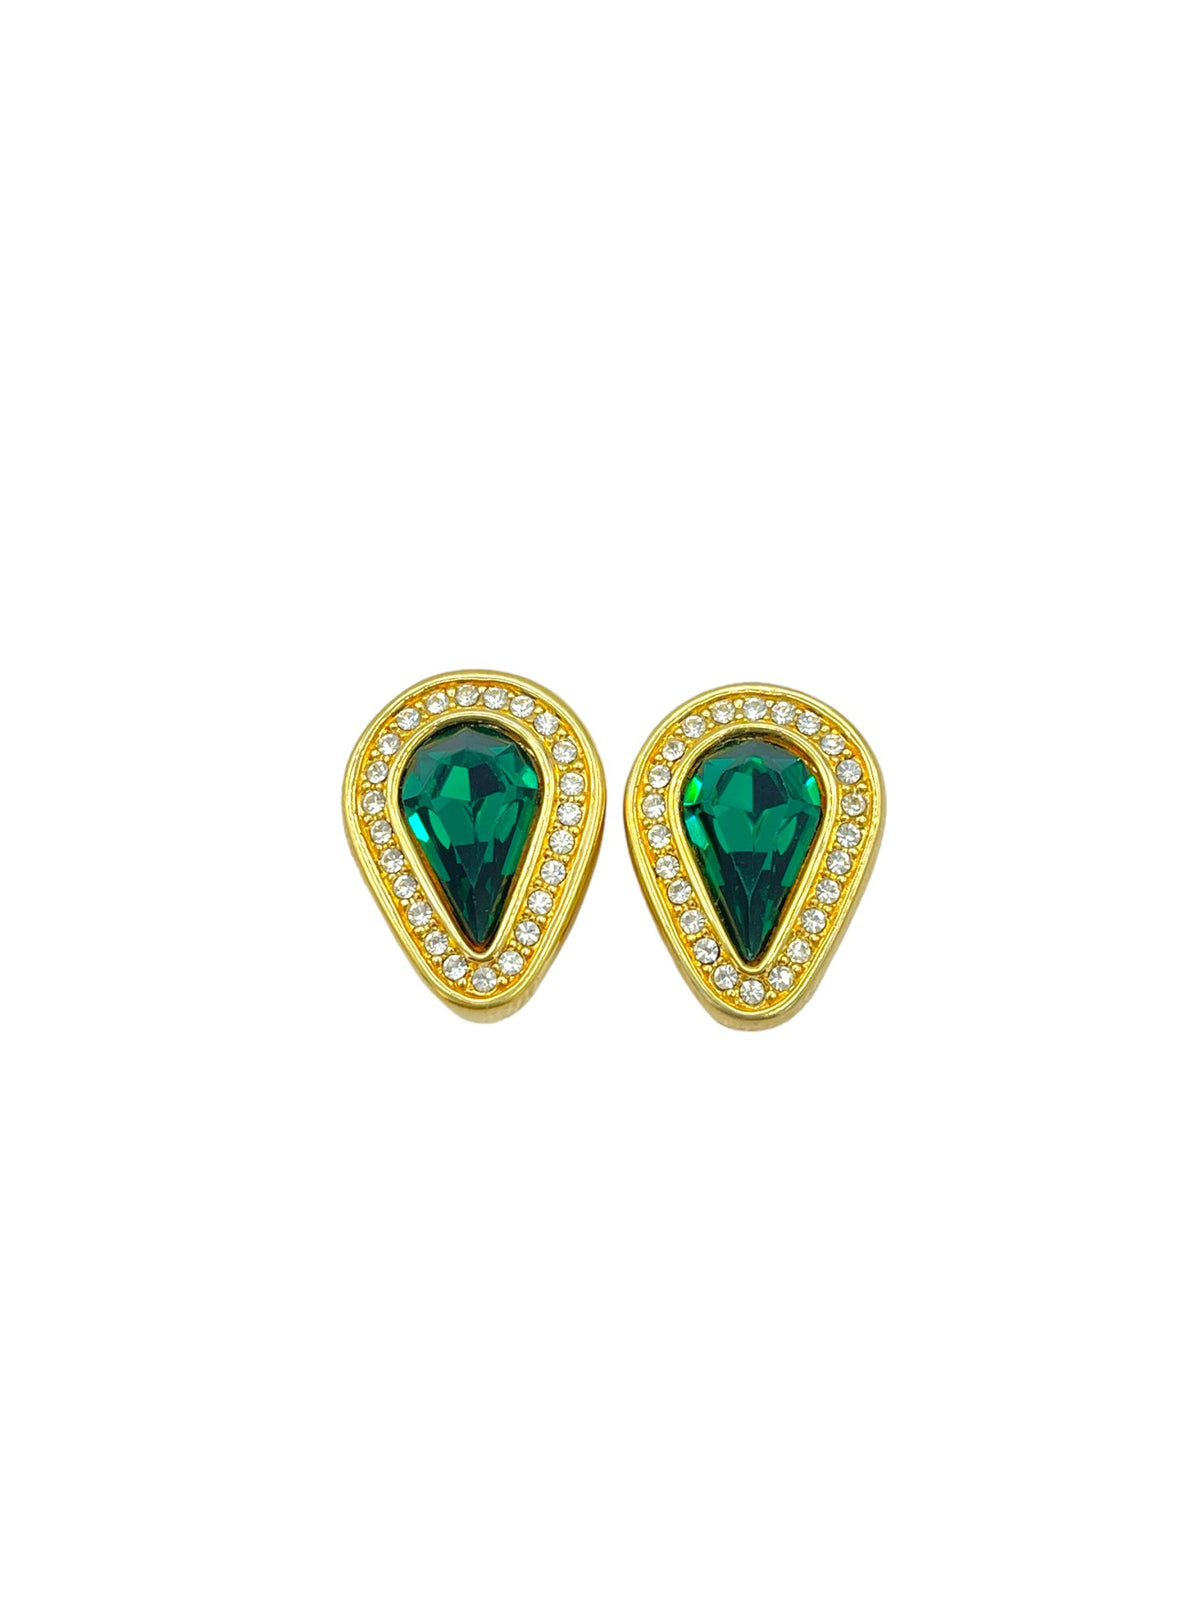 Gold Swarovski Green Crystal Vintage Clip-On Earrings - 24 Wishes Vintage Jewelry